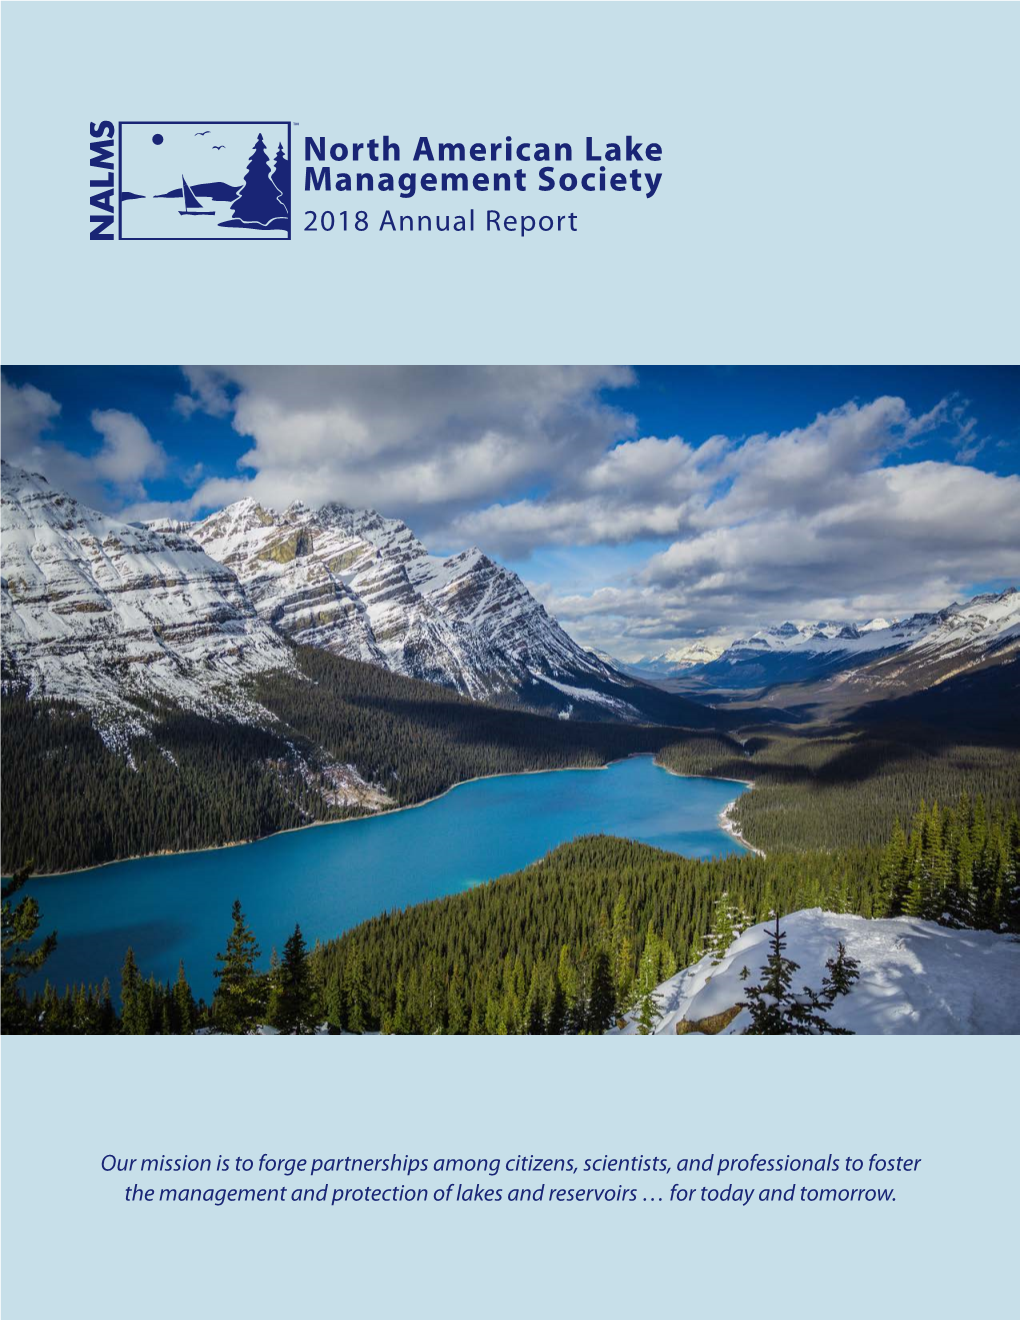 North American Lake Management Society 2018 Annual Report